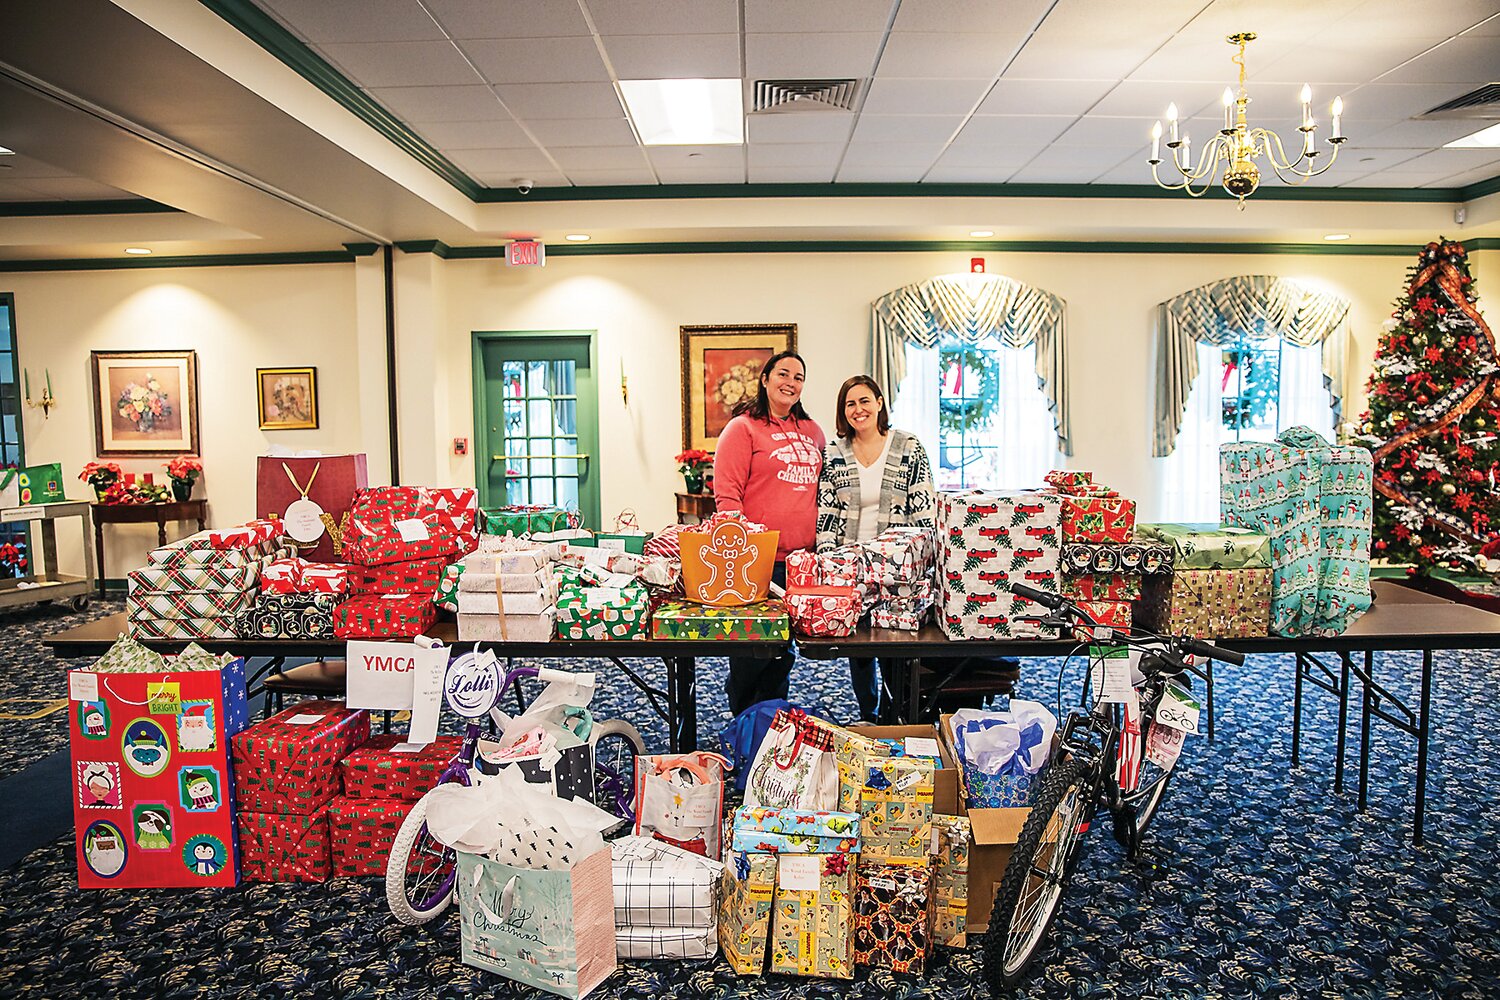 American Heritage’s Adopt-A-Family Program raised $22,8000 to purchase hundreds of “wish list” items for 22 families within the communities American Heritage serves.